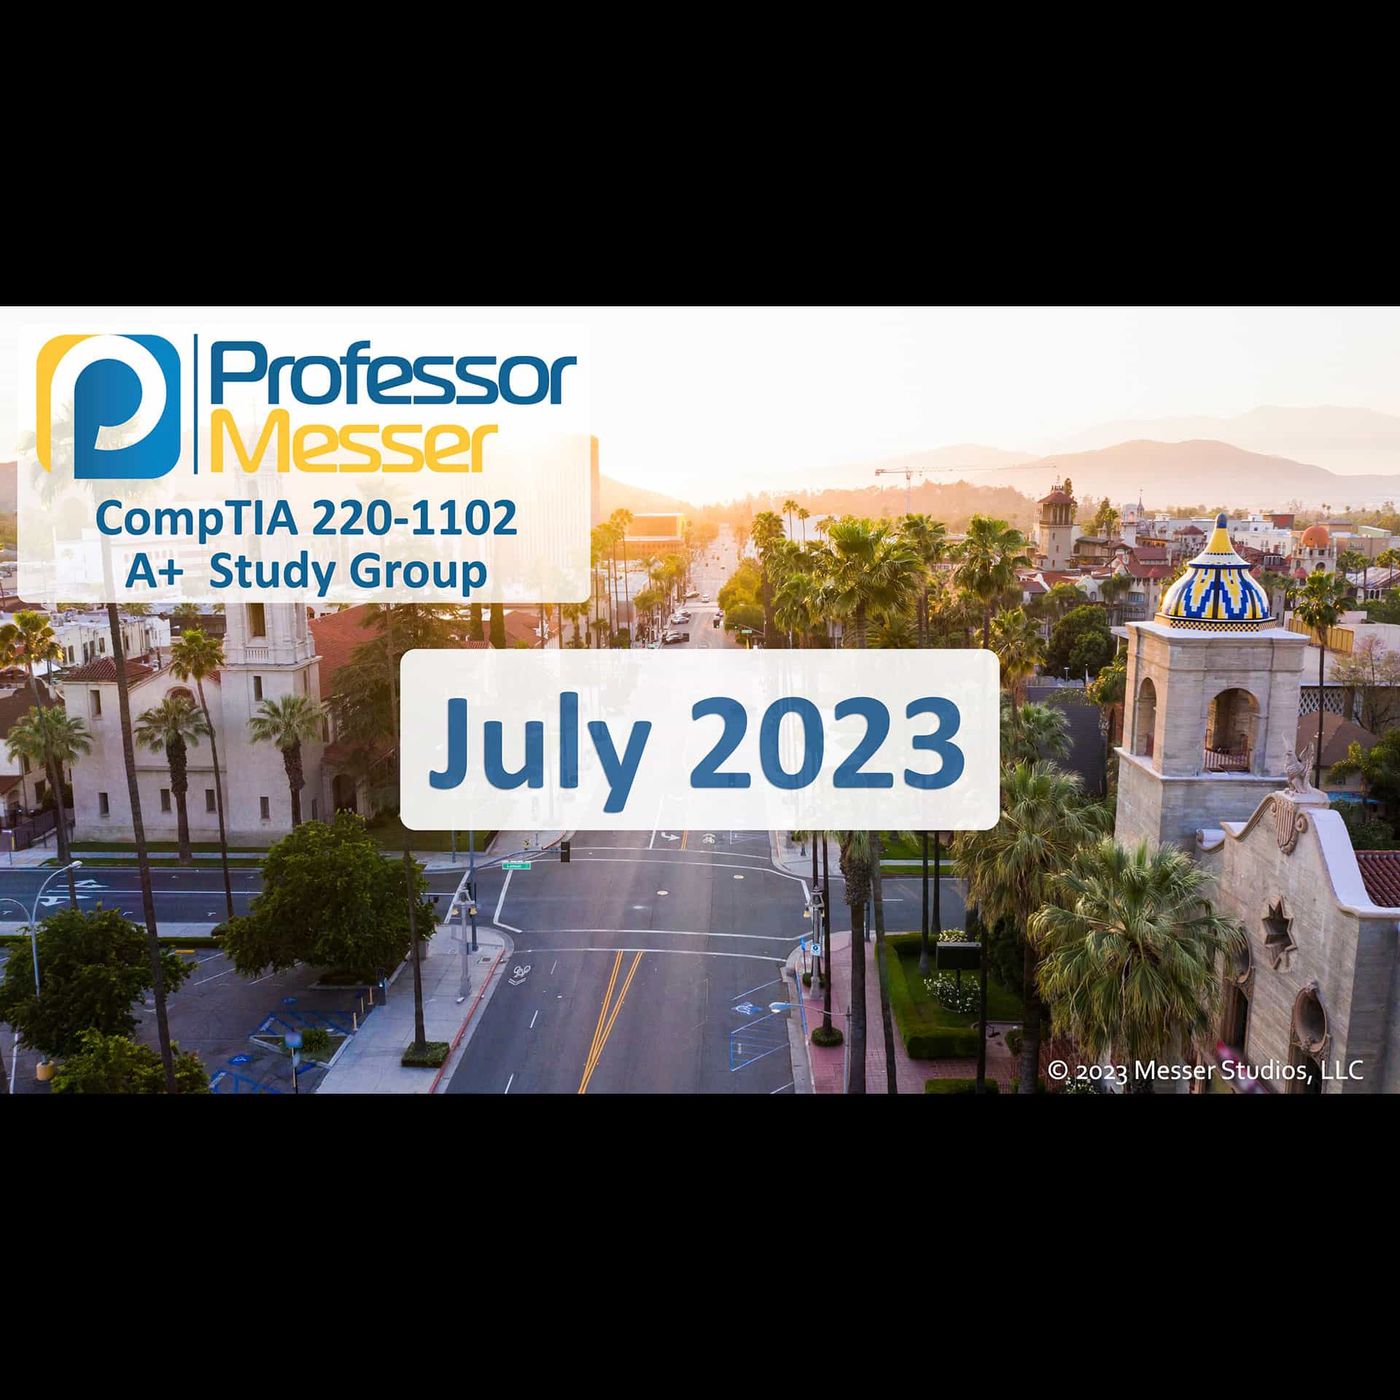 Professor Messer's CompTIA 220-1102 A+ Study Group After Show - July 2023